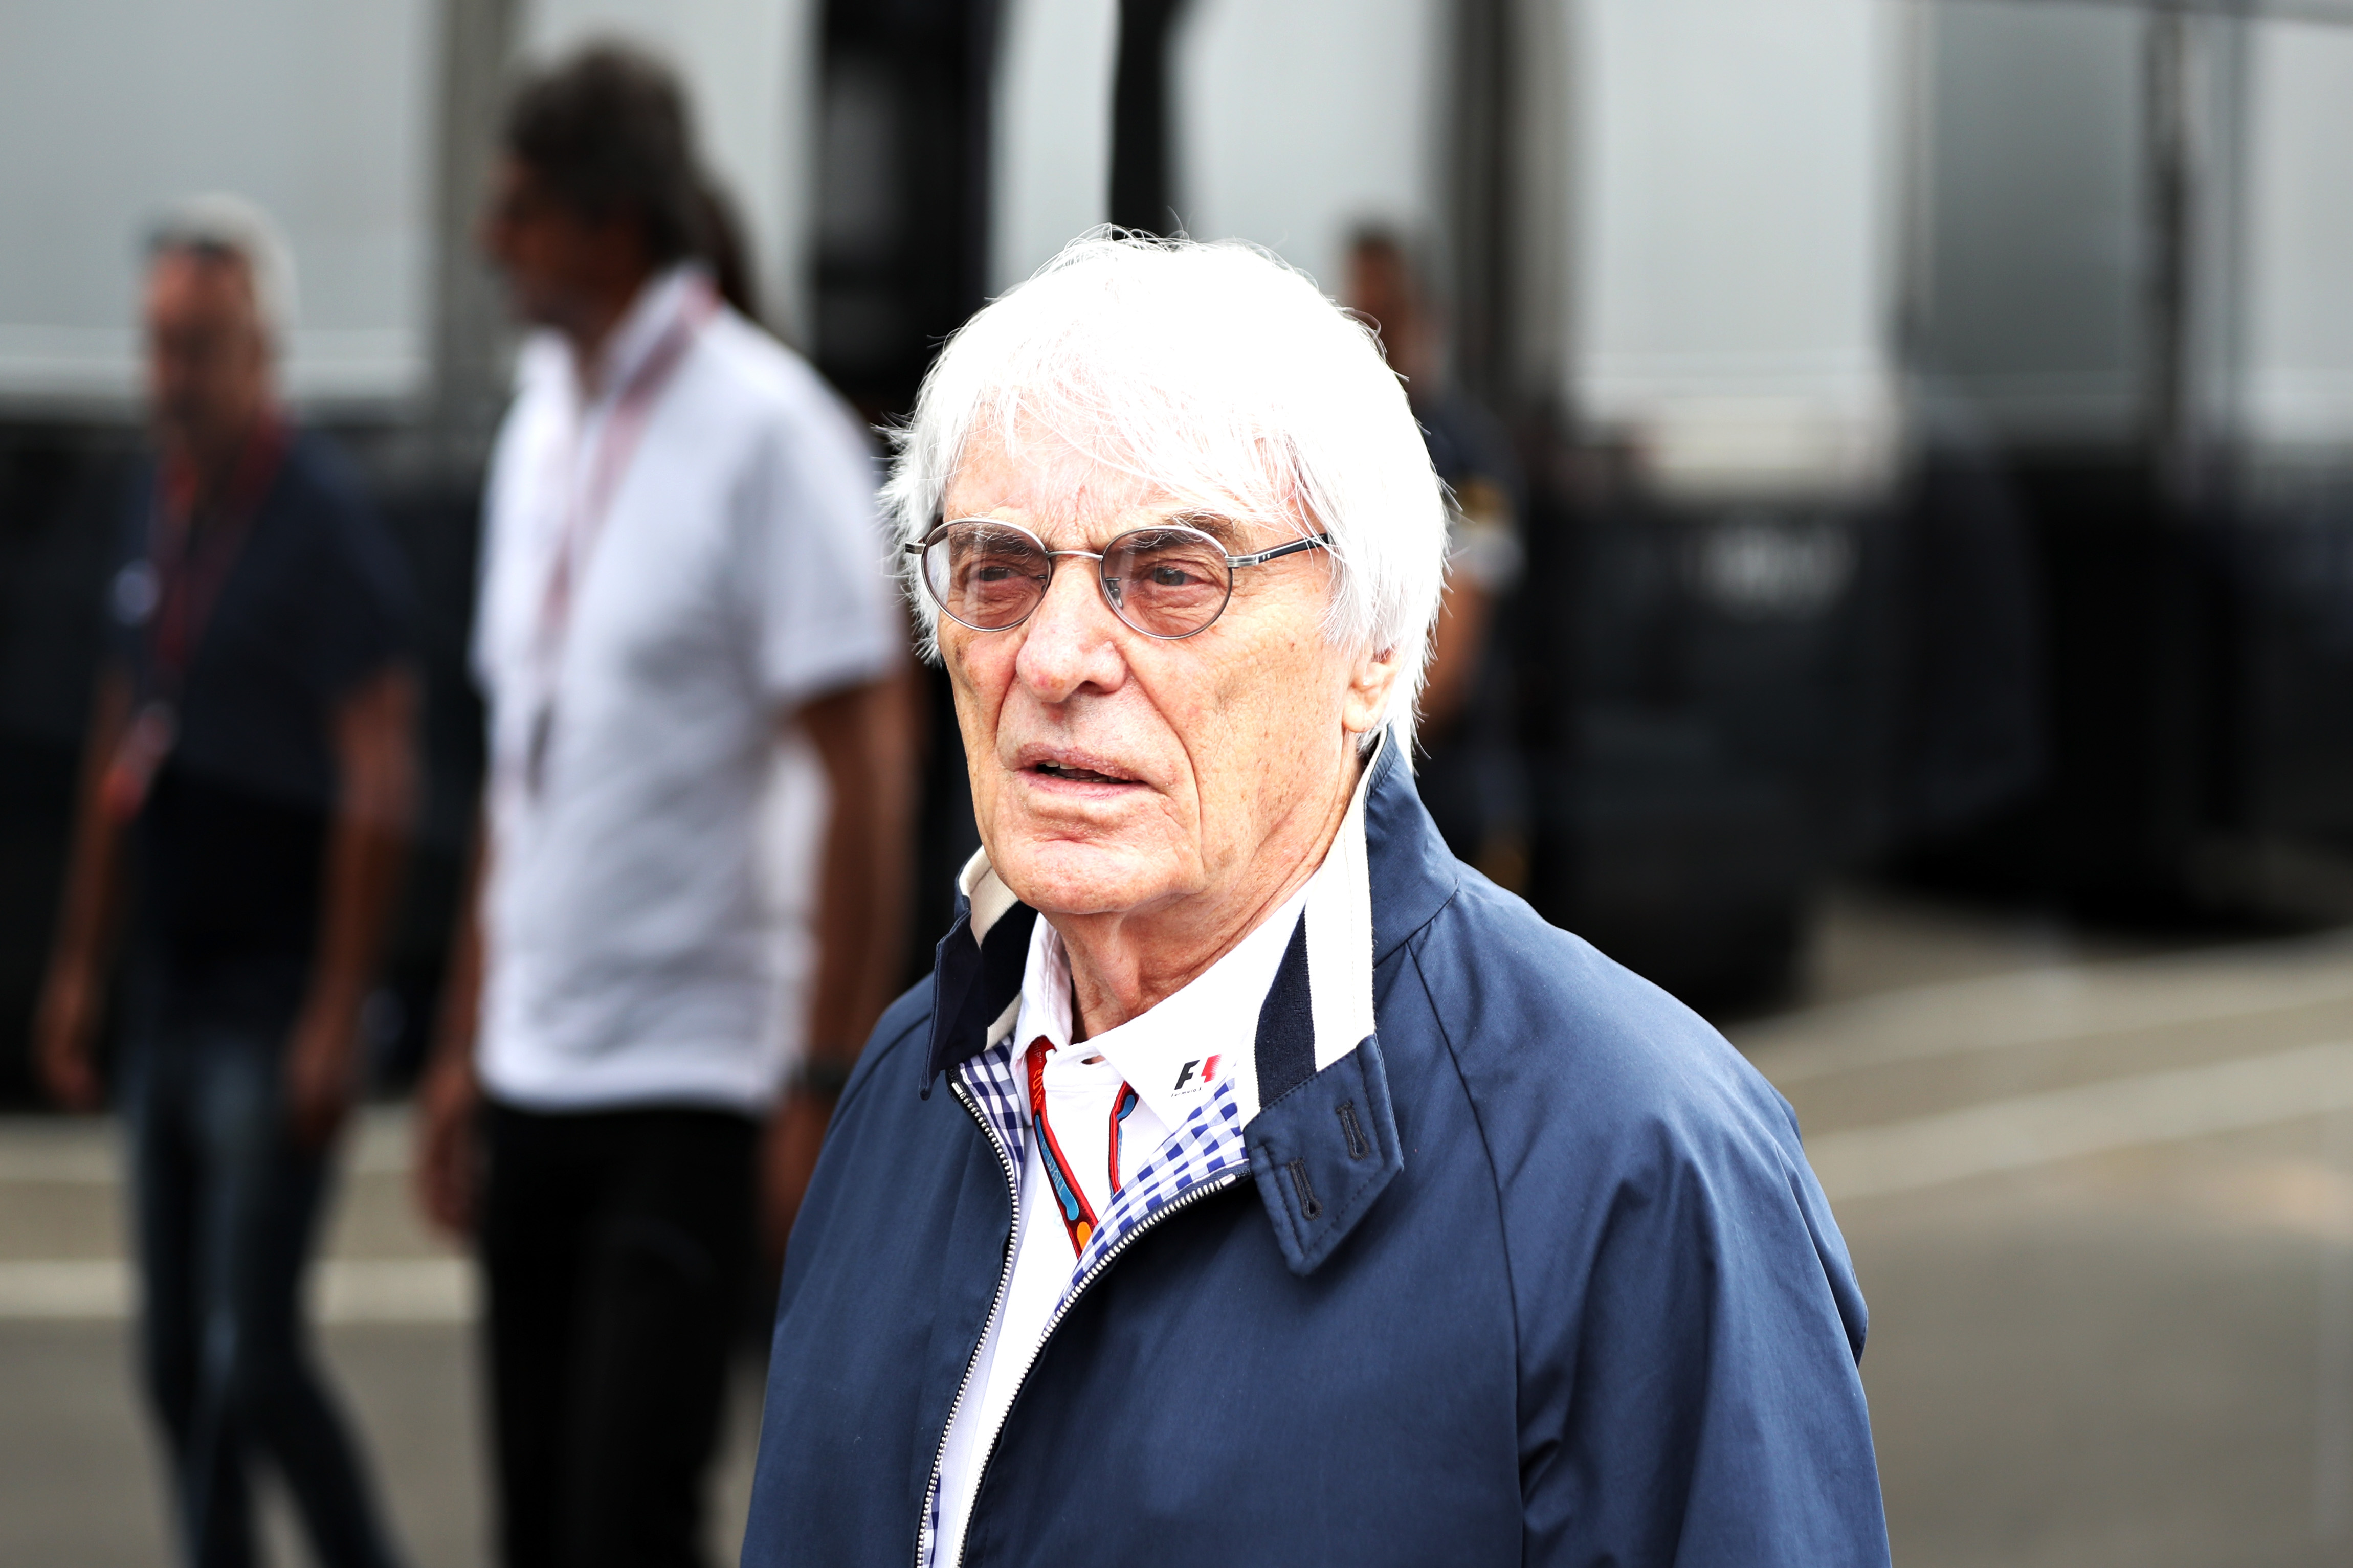 F1 supremo Bernie Ecclestone walks in the paddock  during practice for the Formula One Grand Prix of Germany on July 29, 2016, in Hockenheim, Germany (Mark Thompson—Getty Images)